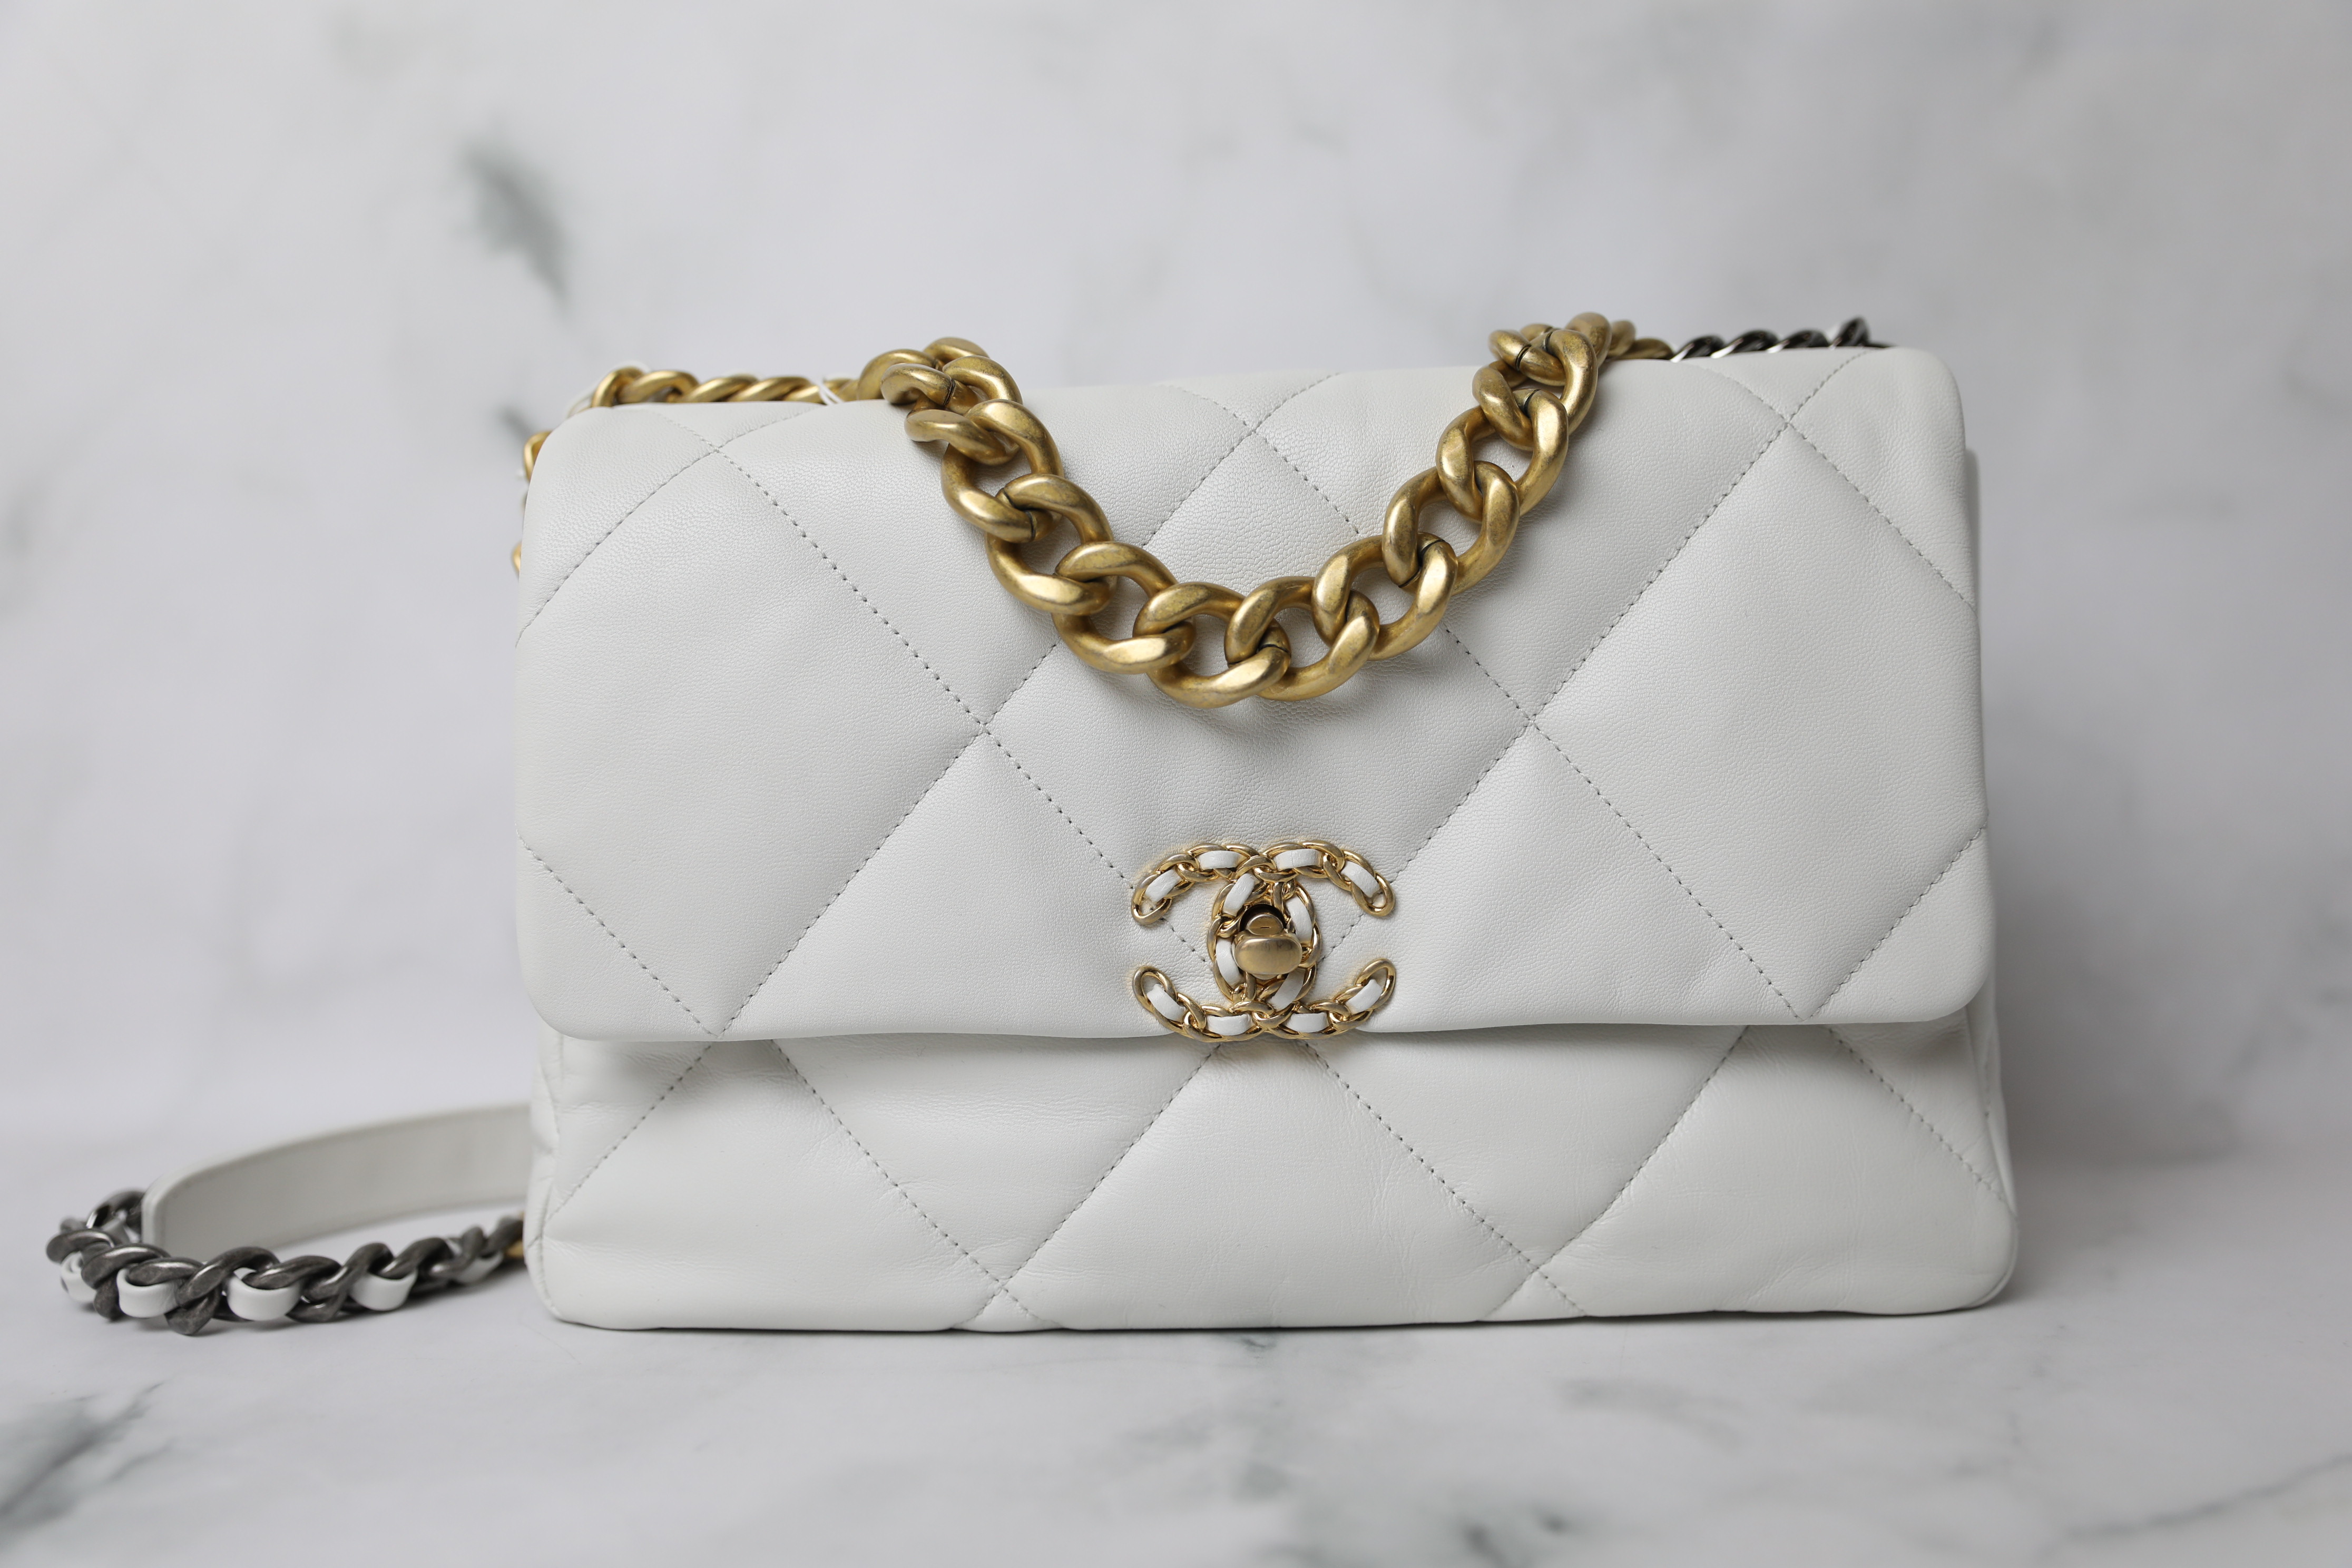 Chanel 19 Large, White, Preowned in Box WA001